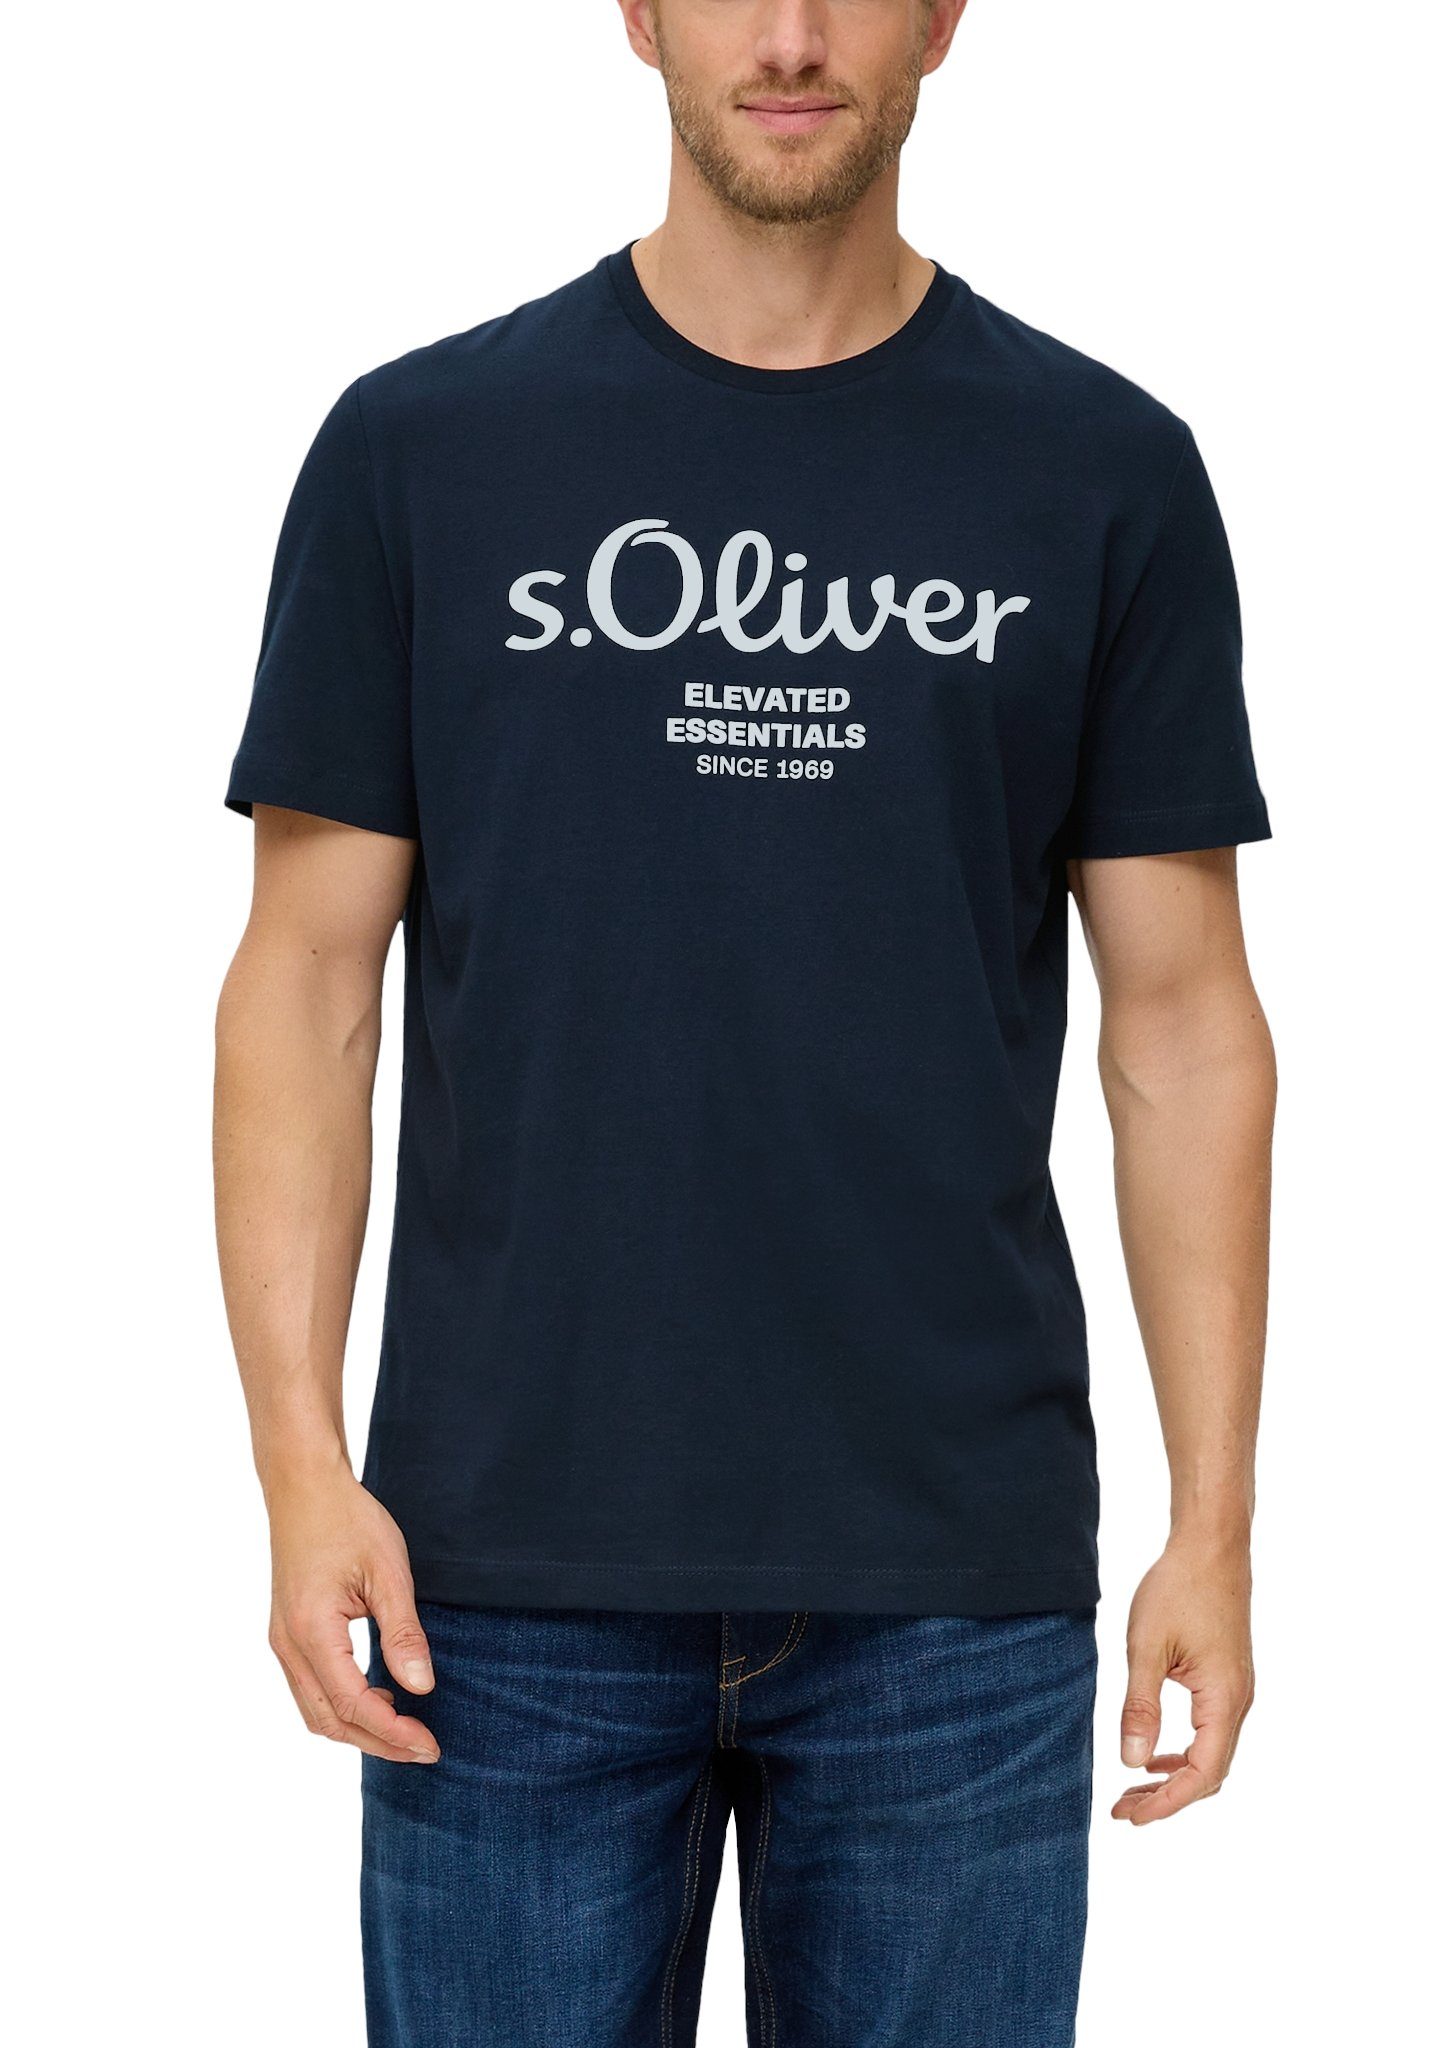 s.Oliver T-Shirt im sportiven Look blue